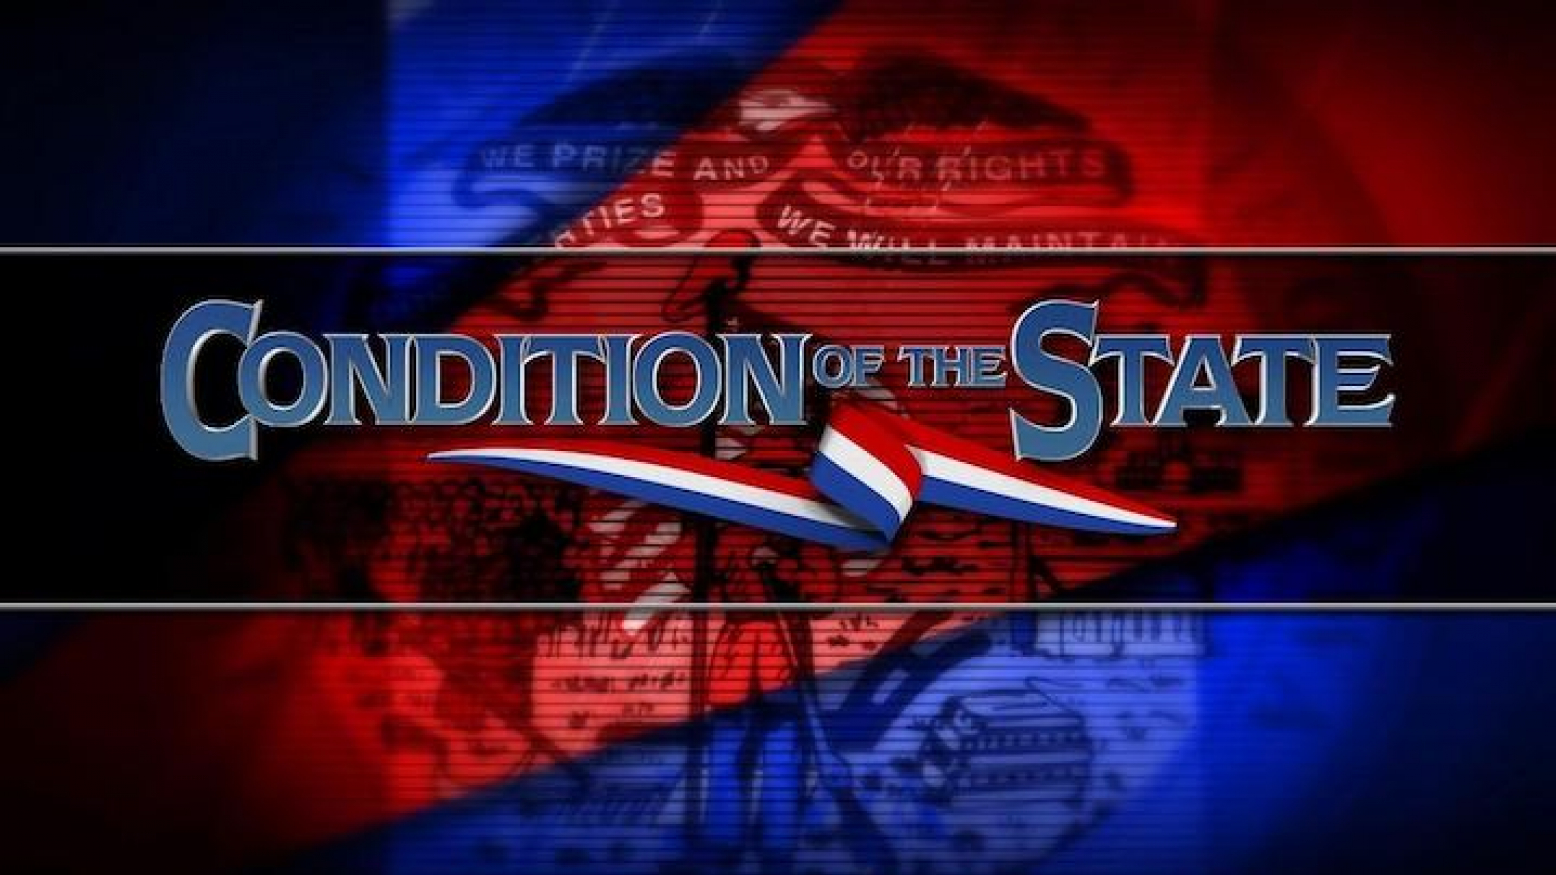 The text "Condition of the State" over a background of a stylized image of the Iowa flag with blue and red overlay.